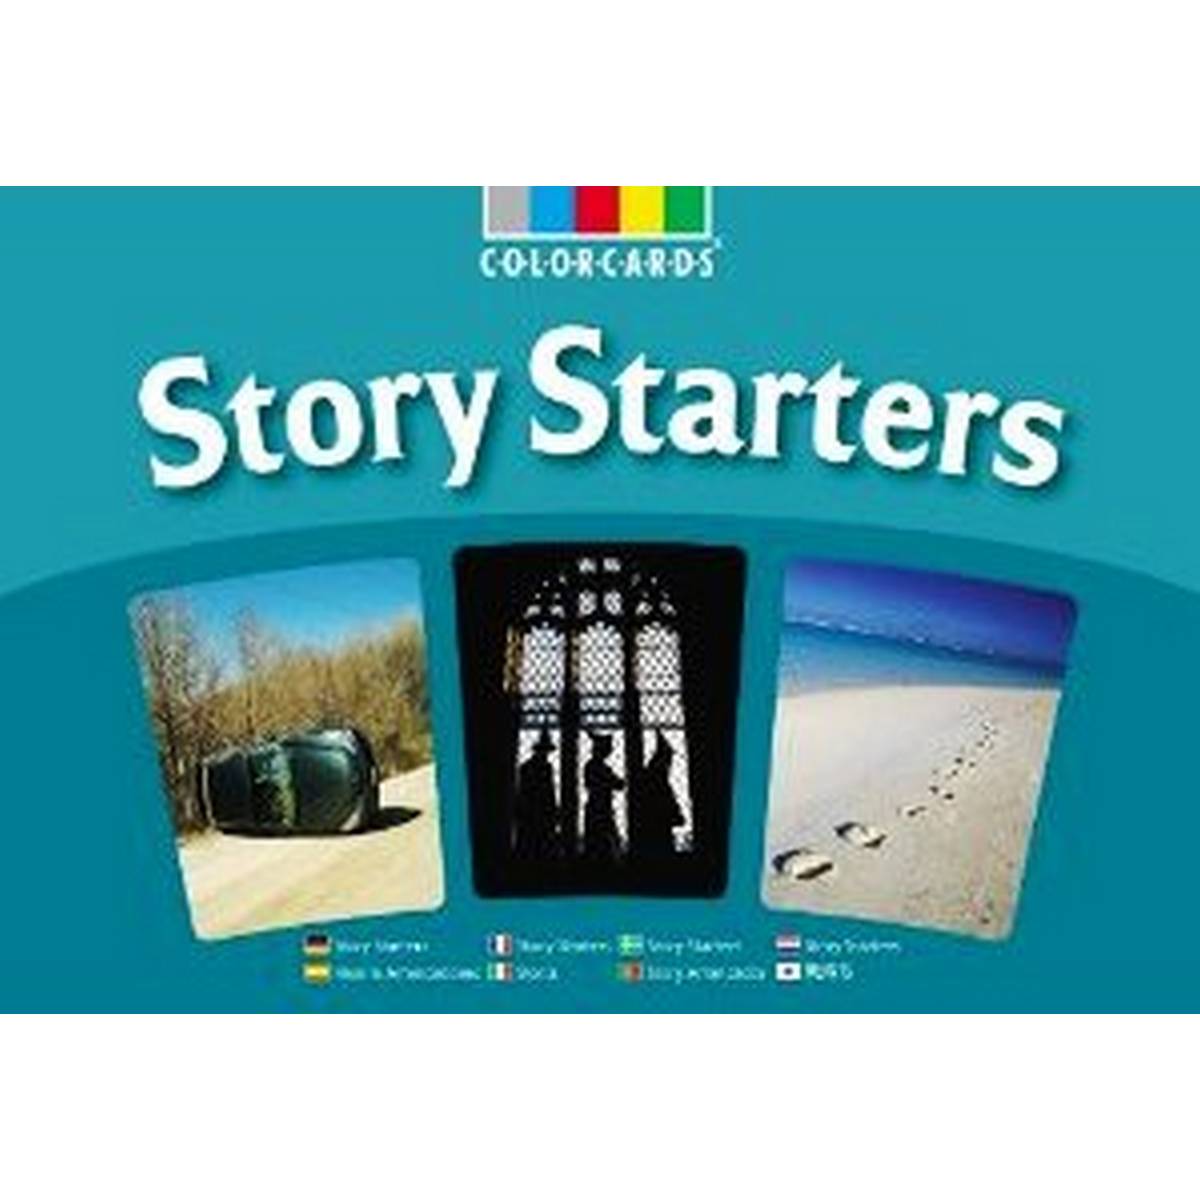 ColorCards: Story Starters